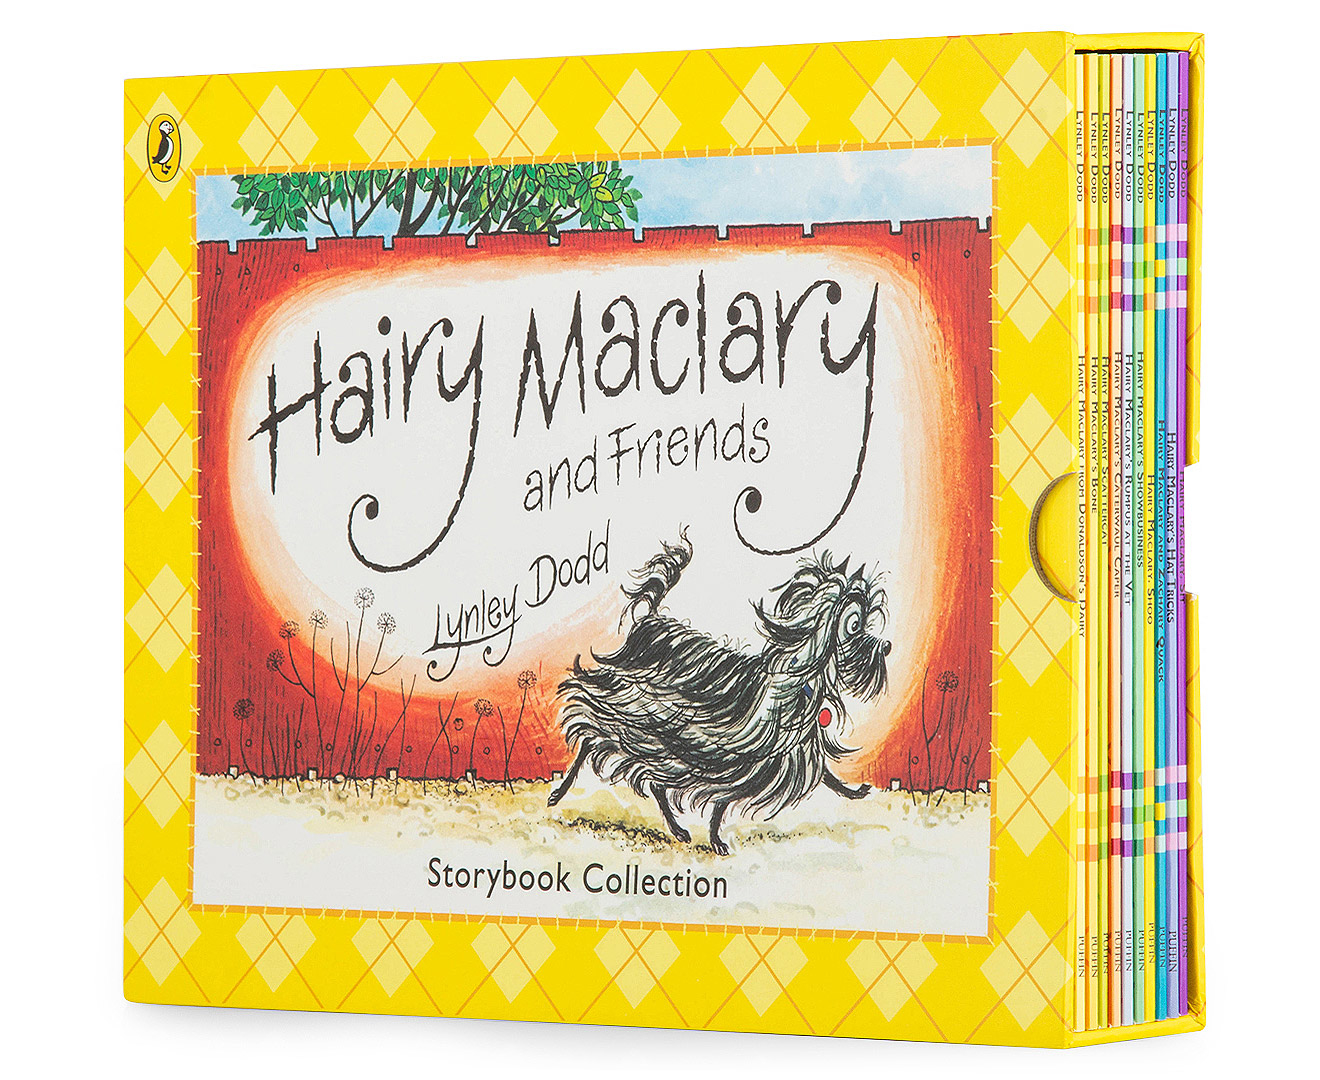 Hairy Maclary & Friends 10-Storybook Collection